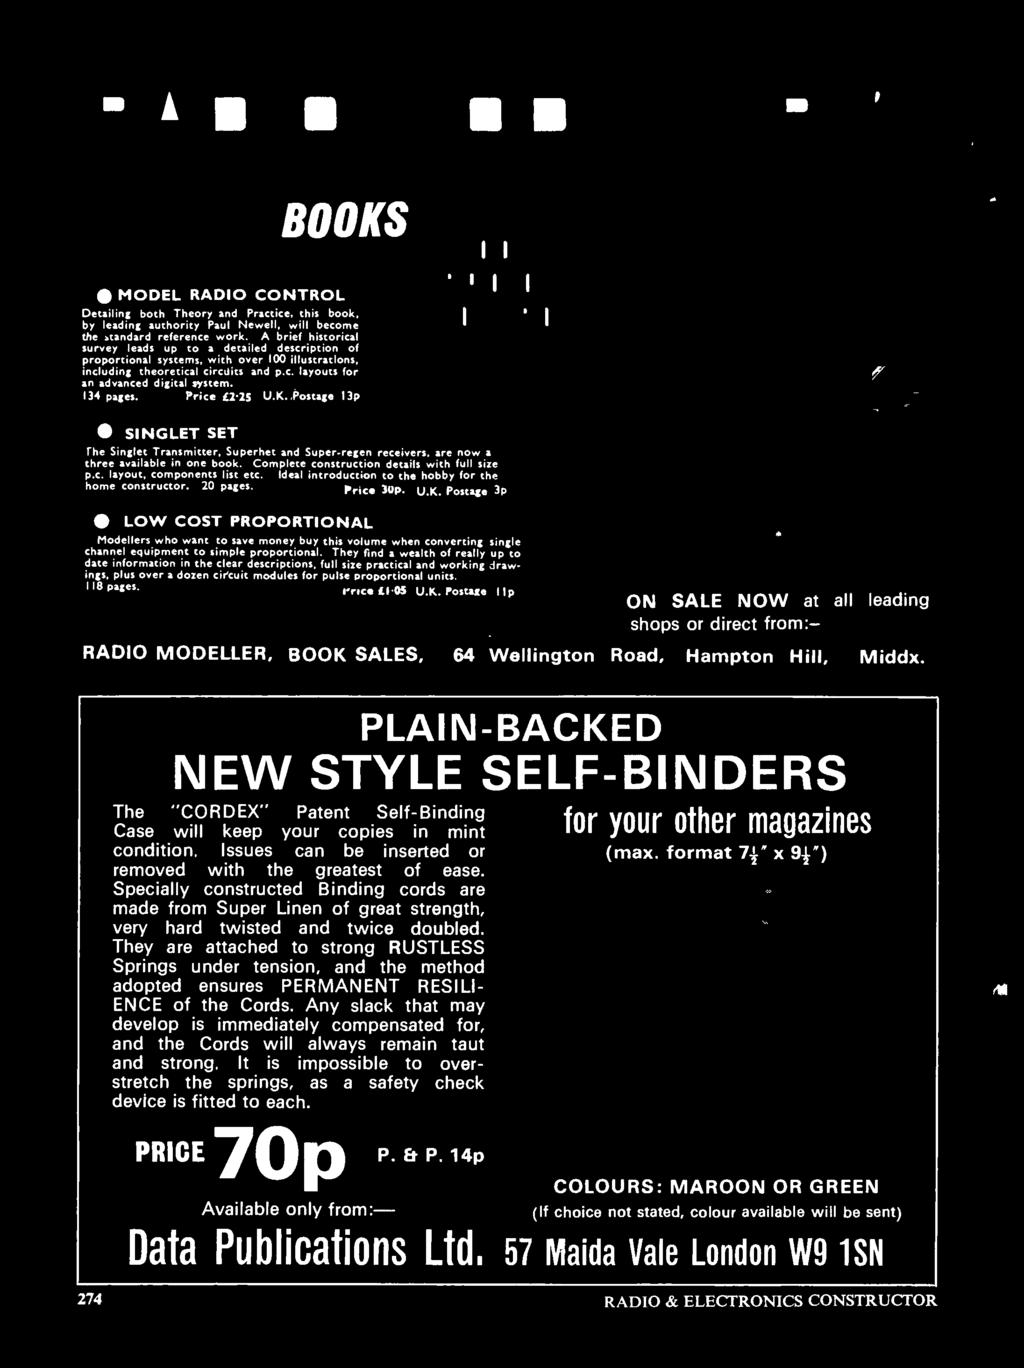 system dnitn _ Ratt,cal uemples and lull...it details three available in one book. Complete construction details with full size p.c. layout, components list etc.